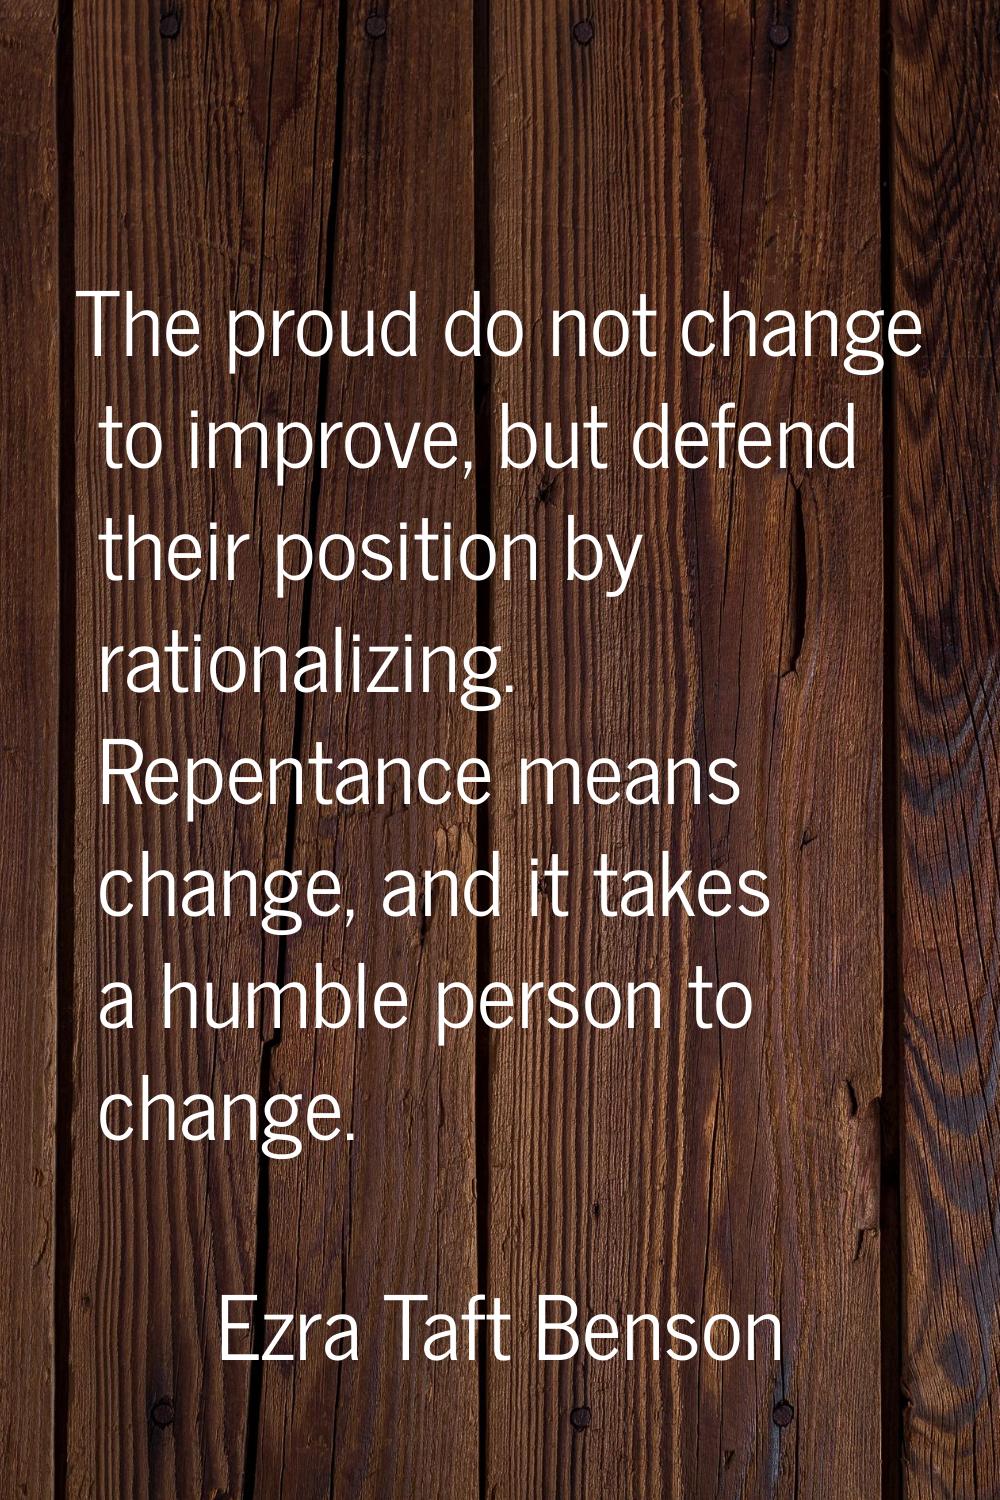 The proud do not change to improve, but defend their position by rationalizing. Repentance means ch